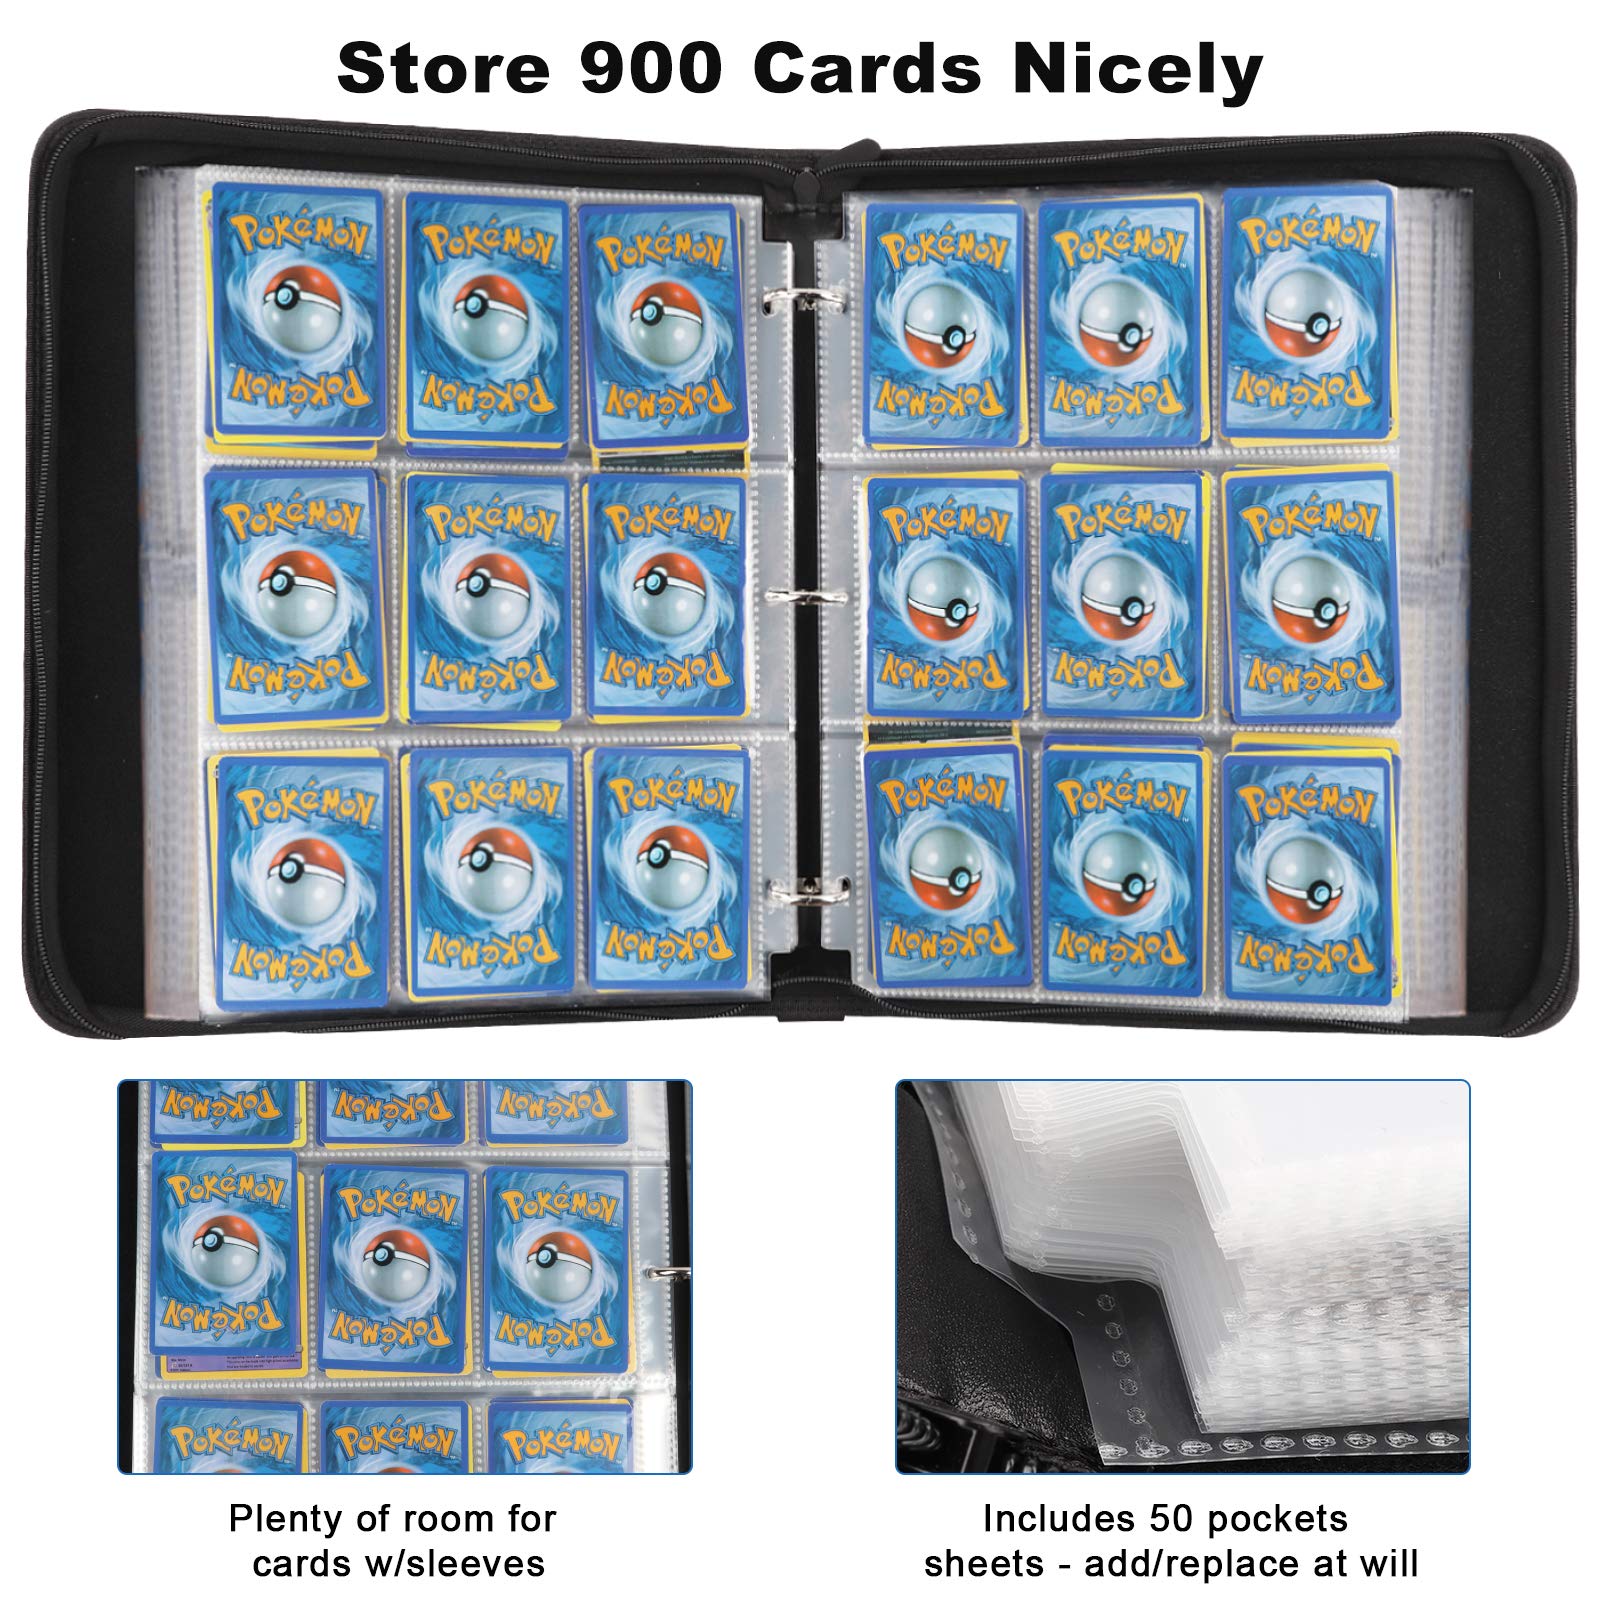 WEWOW Carrying Case Binder for Pokemon Cards, 9-Pocket Card Binder Holder Fits 900 Cards with 50 Pages, Card Binder Collector Album Storage Book Folder for Trading Cards.